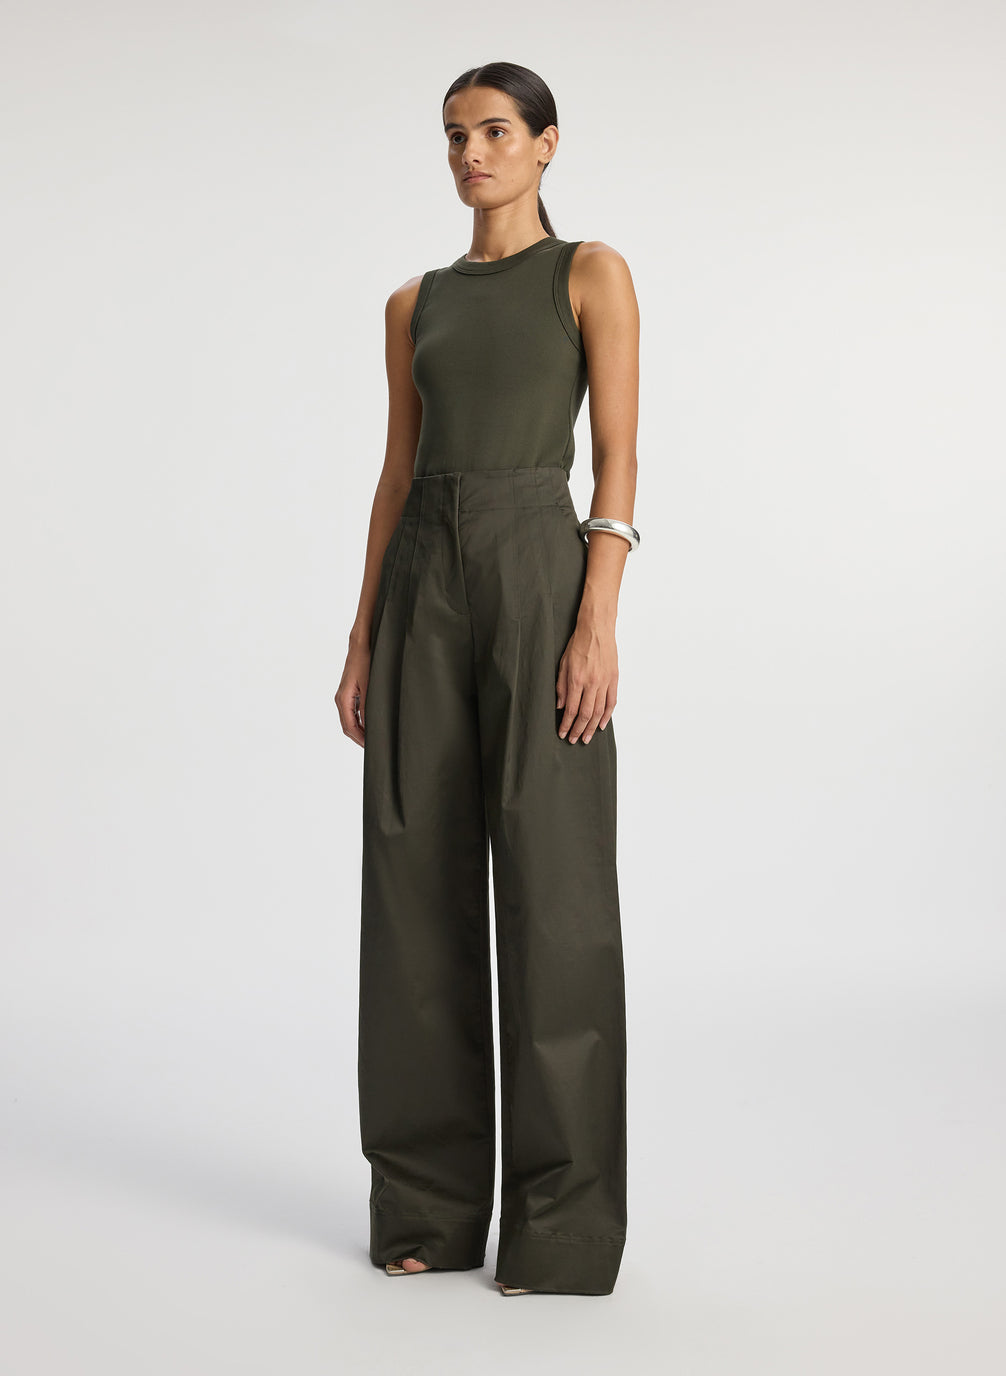 side view of woman wearing olive green tank top and olive green wide leg sateen pants